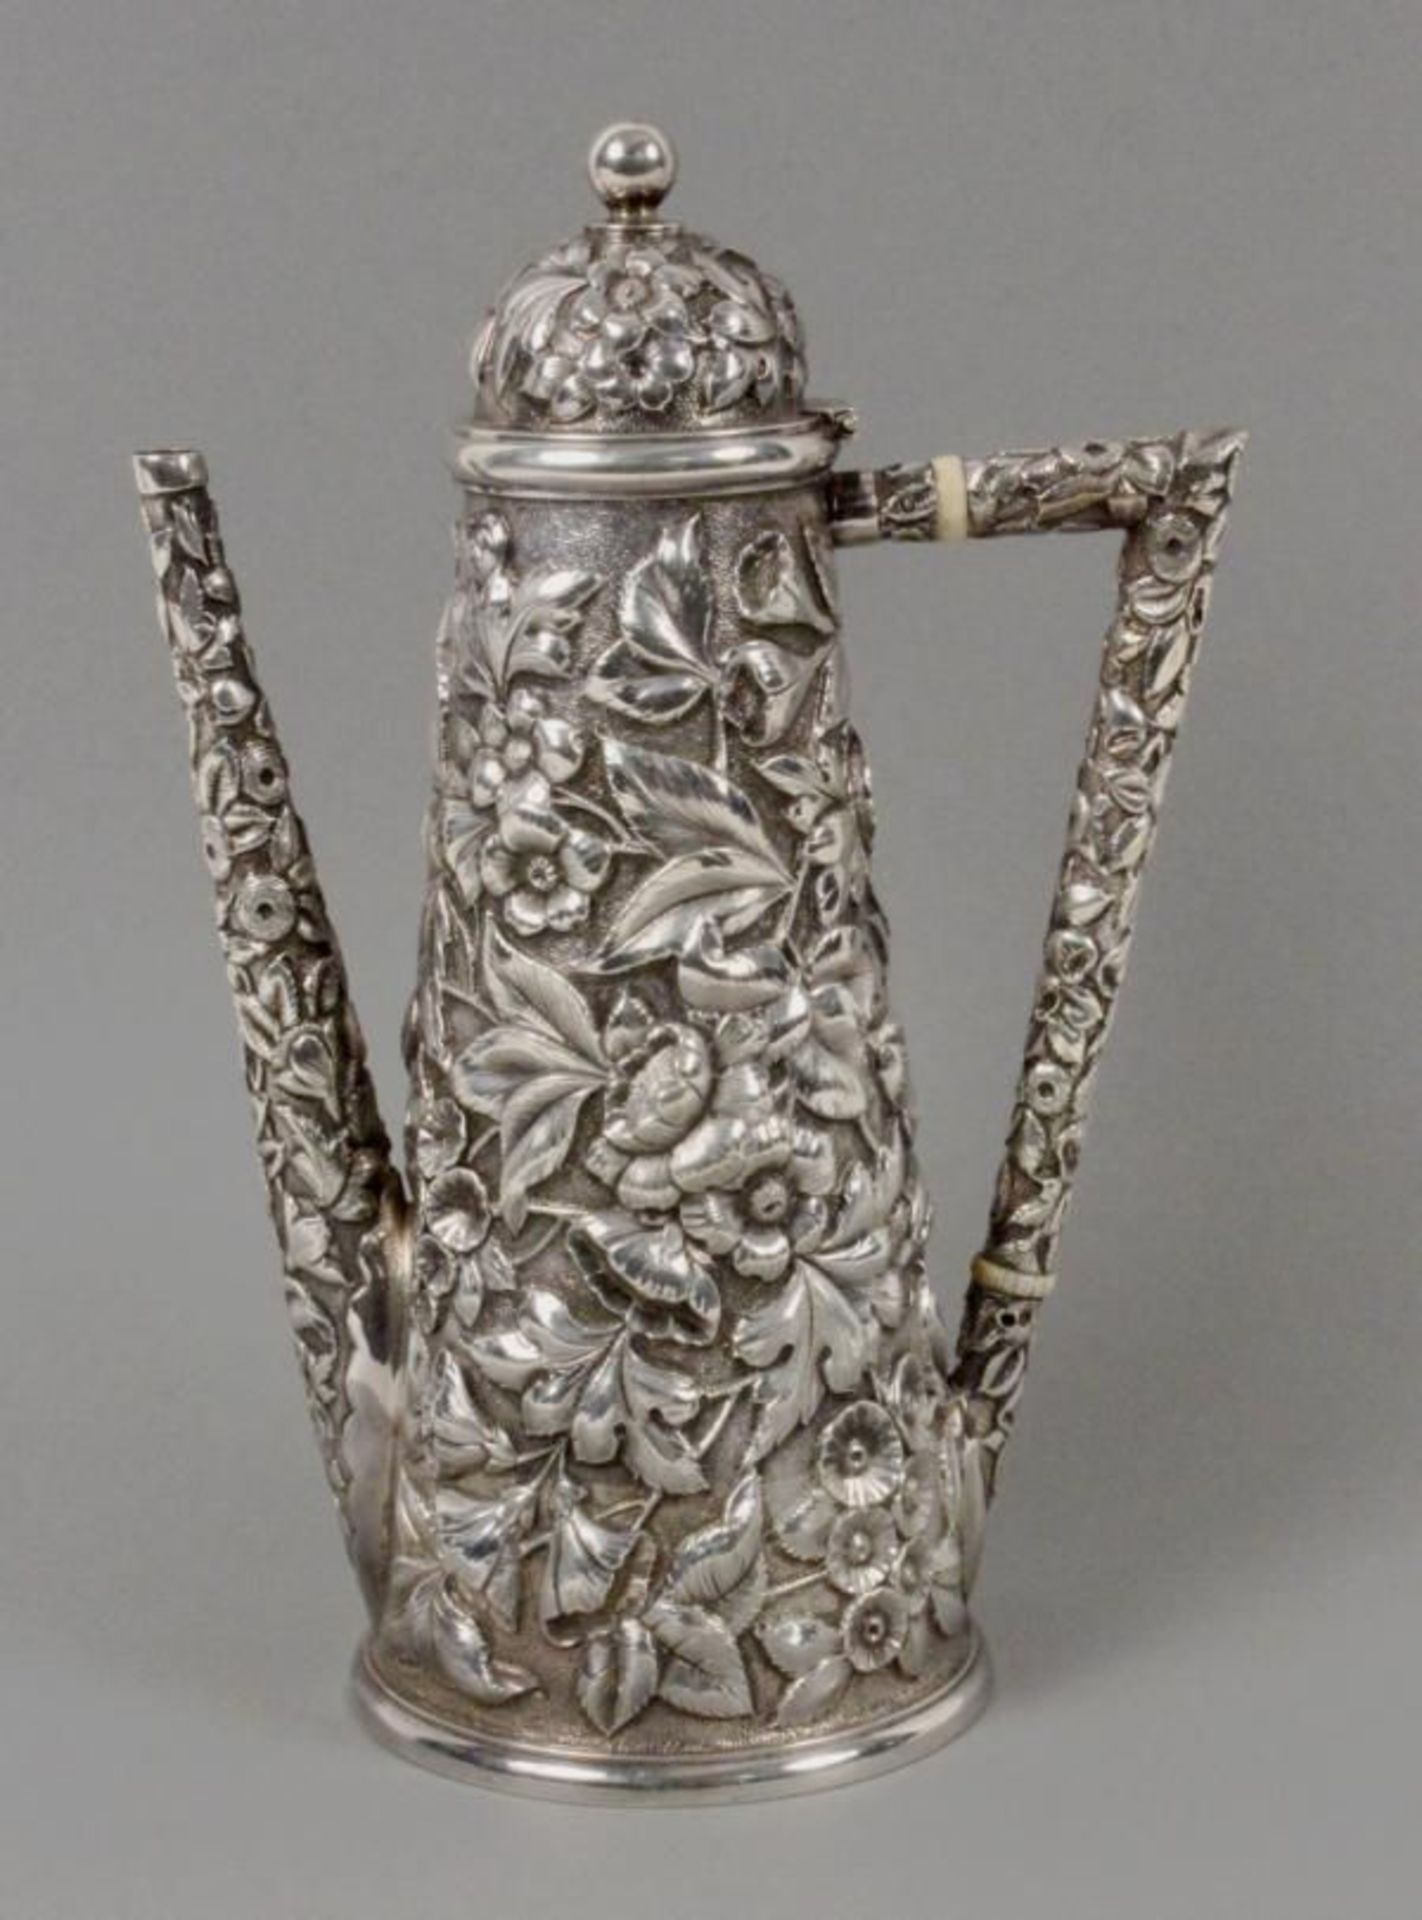 A MOCHA POT John Mason, New York ca. 1890 925 Sterling silver, tapered shape with all-round floral